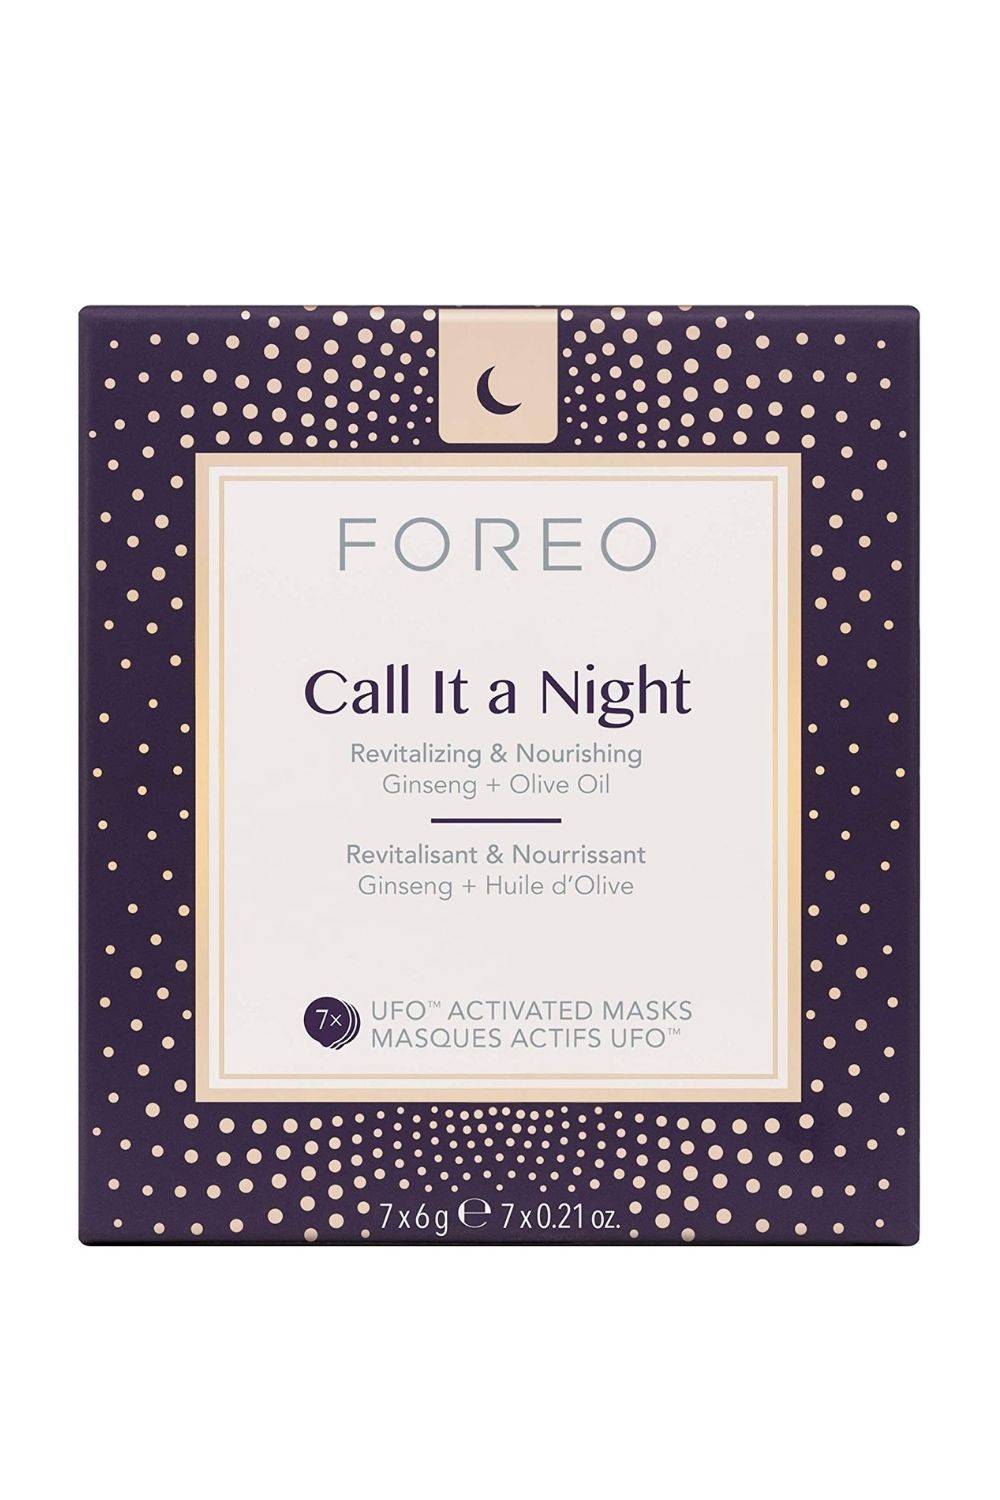 Call It a Night mask de Foreo